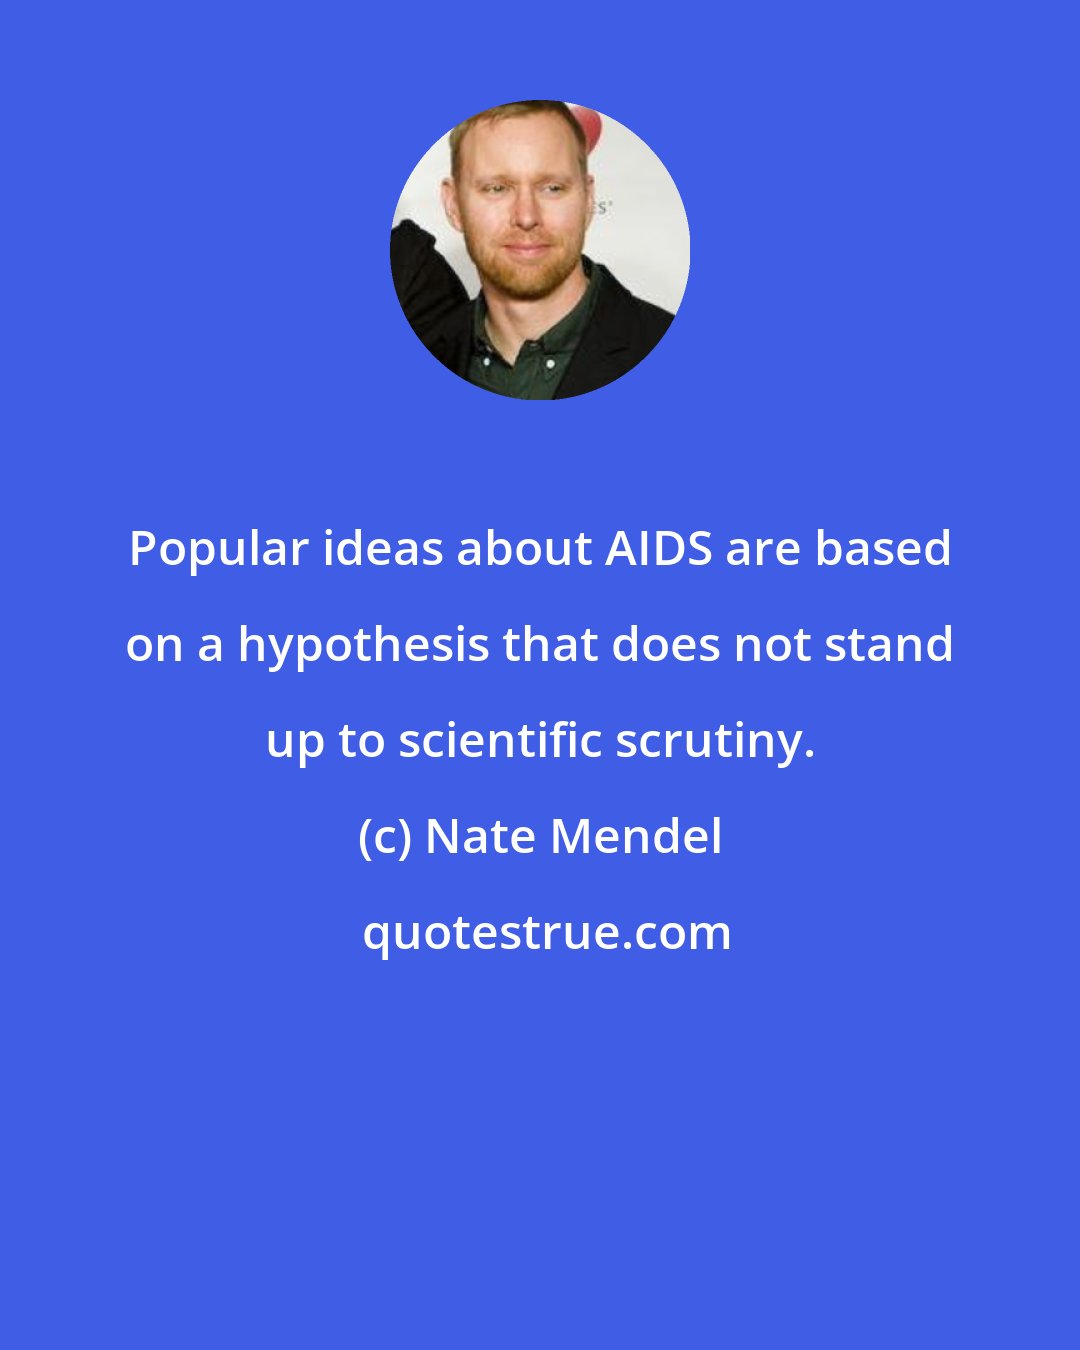 Nate Mendel: Popular ideas about AIDS are based on a hypothesis that does not stand up to scientific scrutiny.